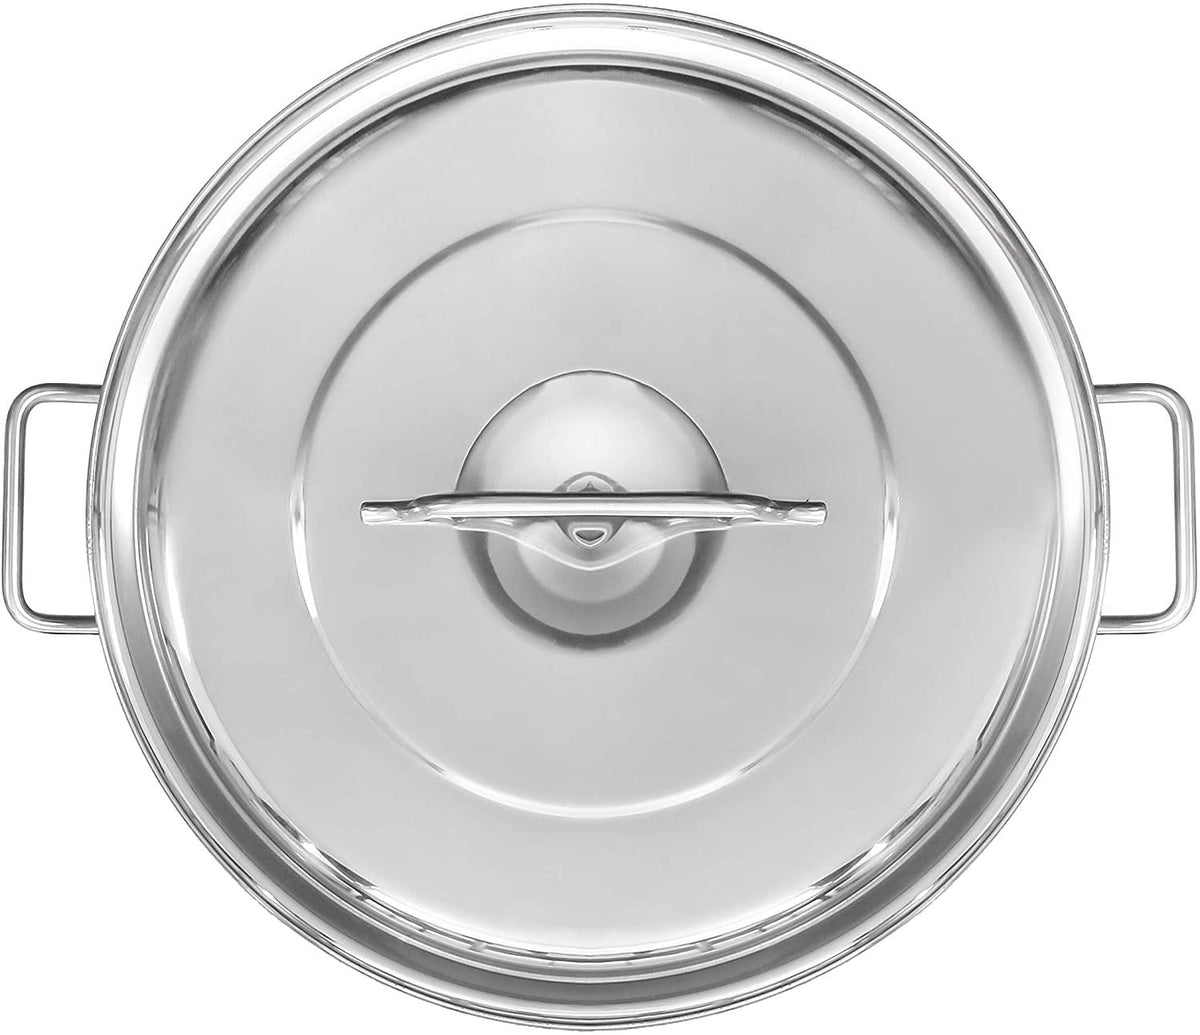 CONCORD 80 QT Stainless Steel Stockpot 3-Ply Bottom 